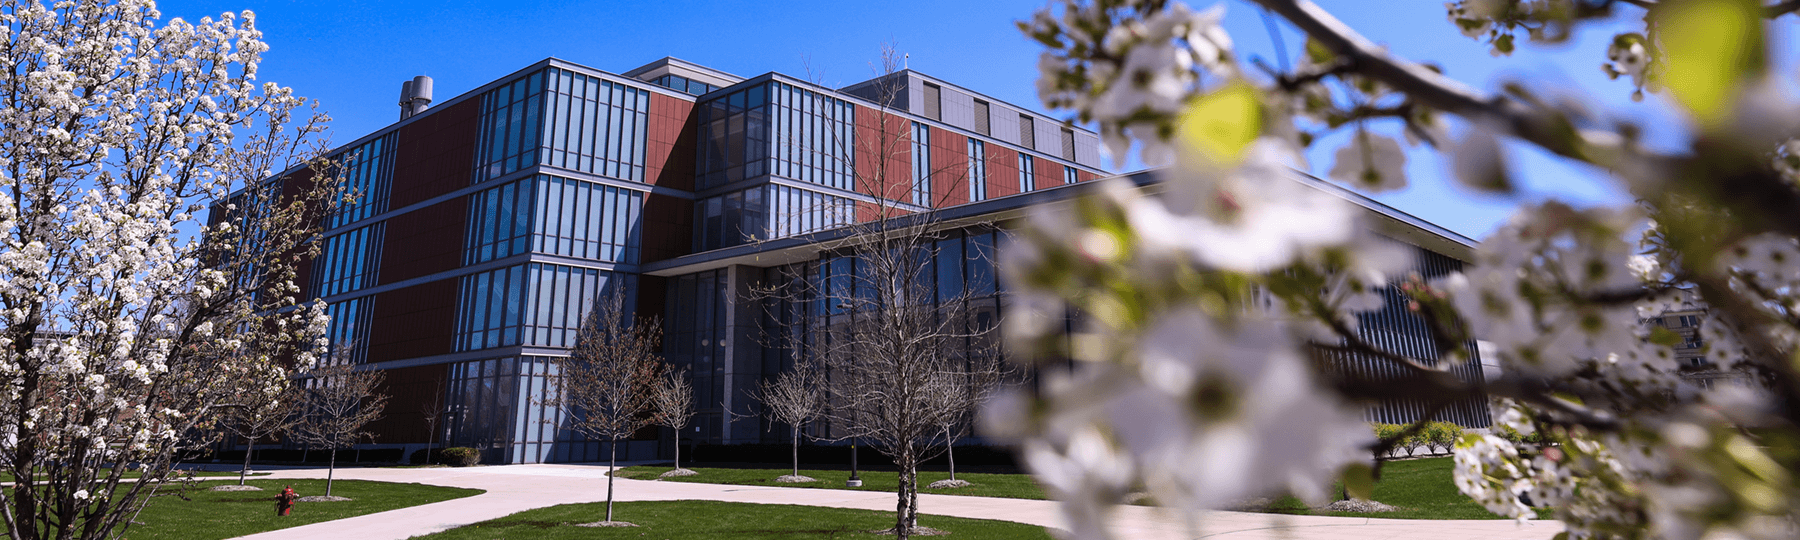 The Biosciences Building on Central Michigan University's campus in the spring.